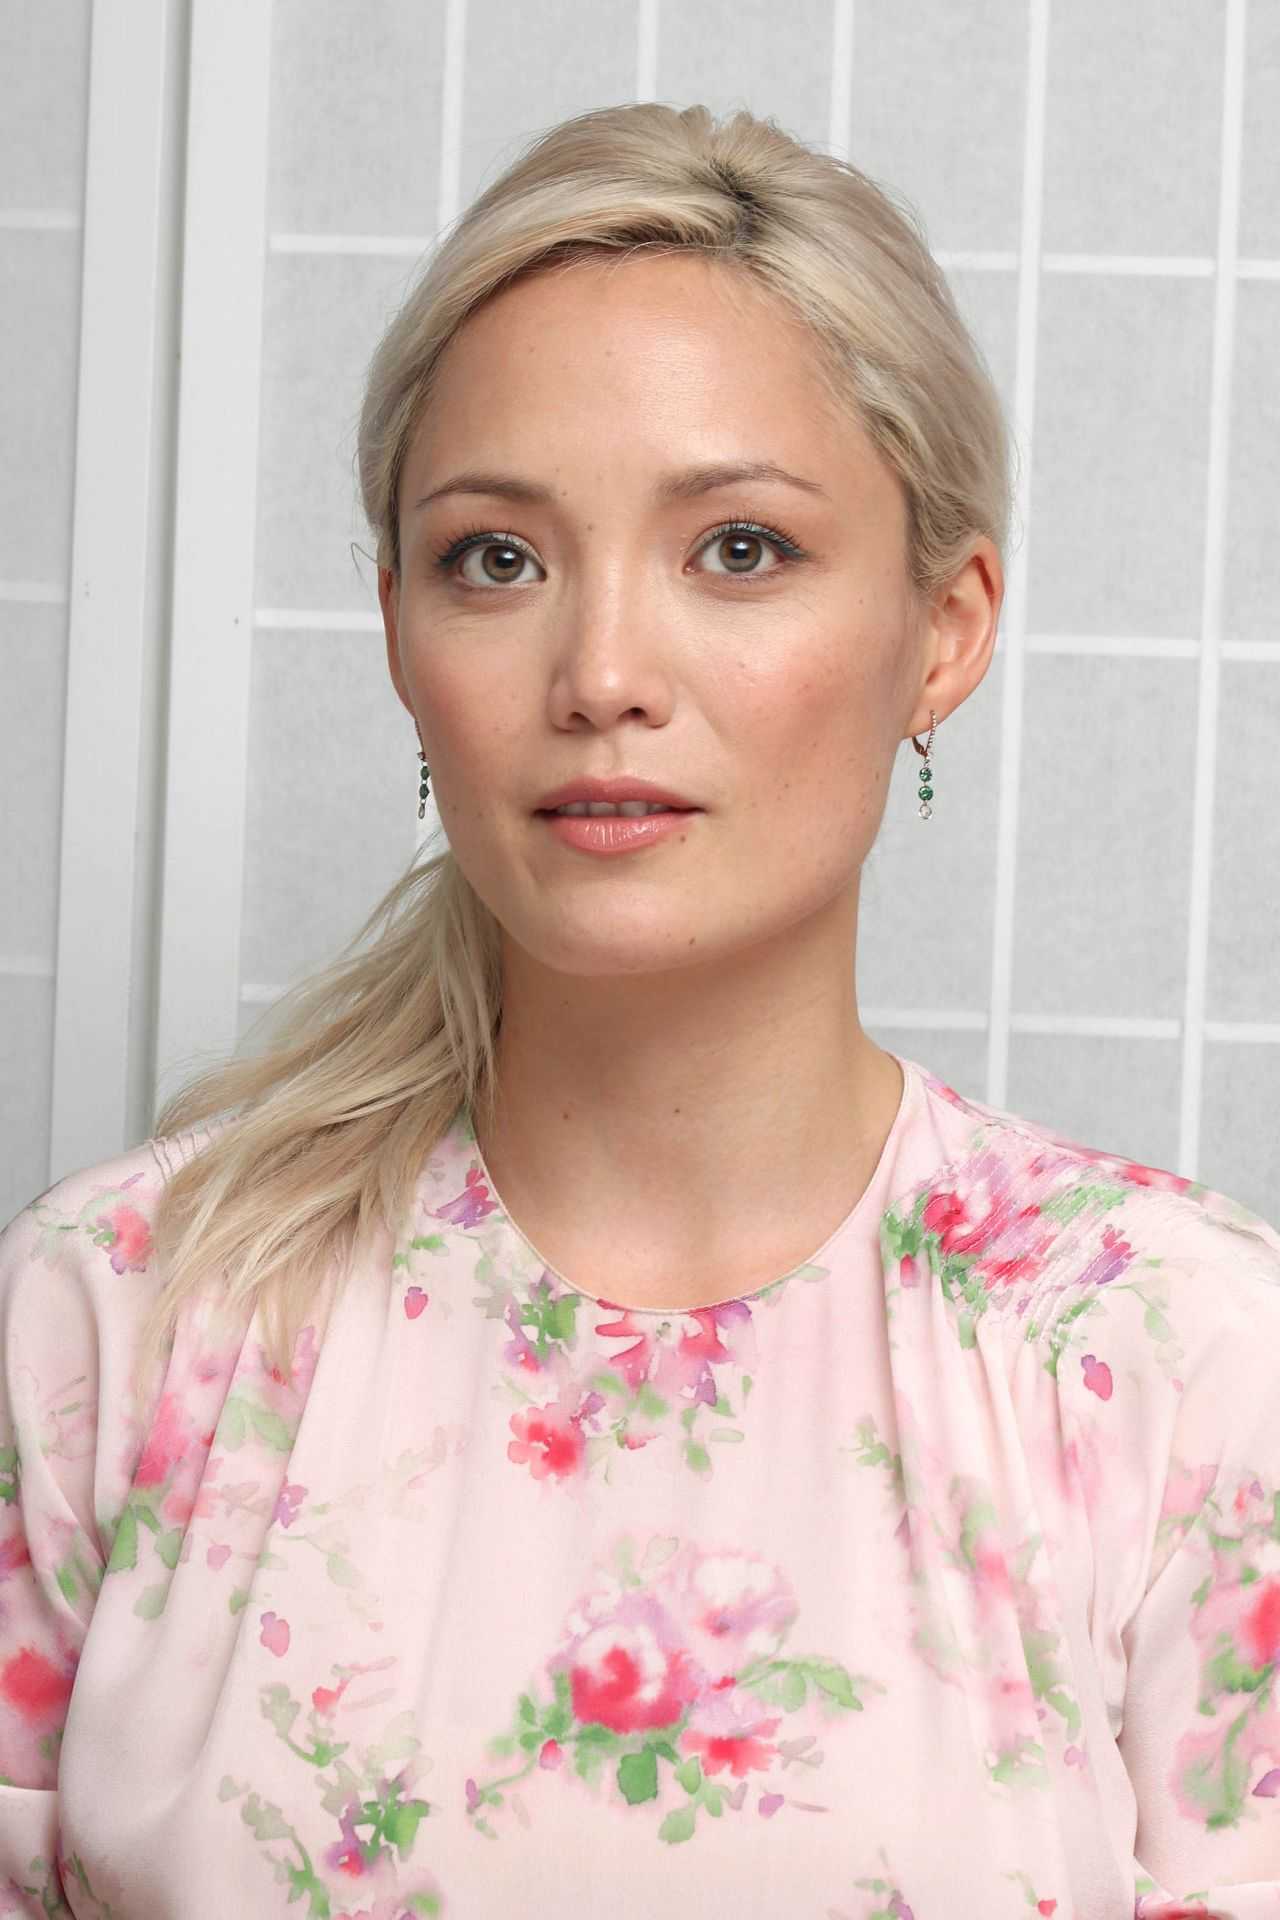 70+ Hot Pictures Of Pom Klementieff Who Plays Mantis In Marvel Cinematic Universe 4